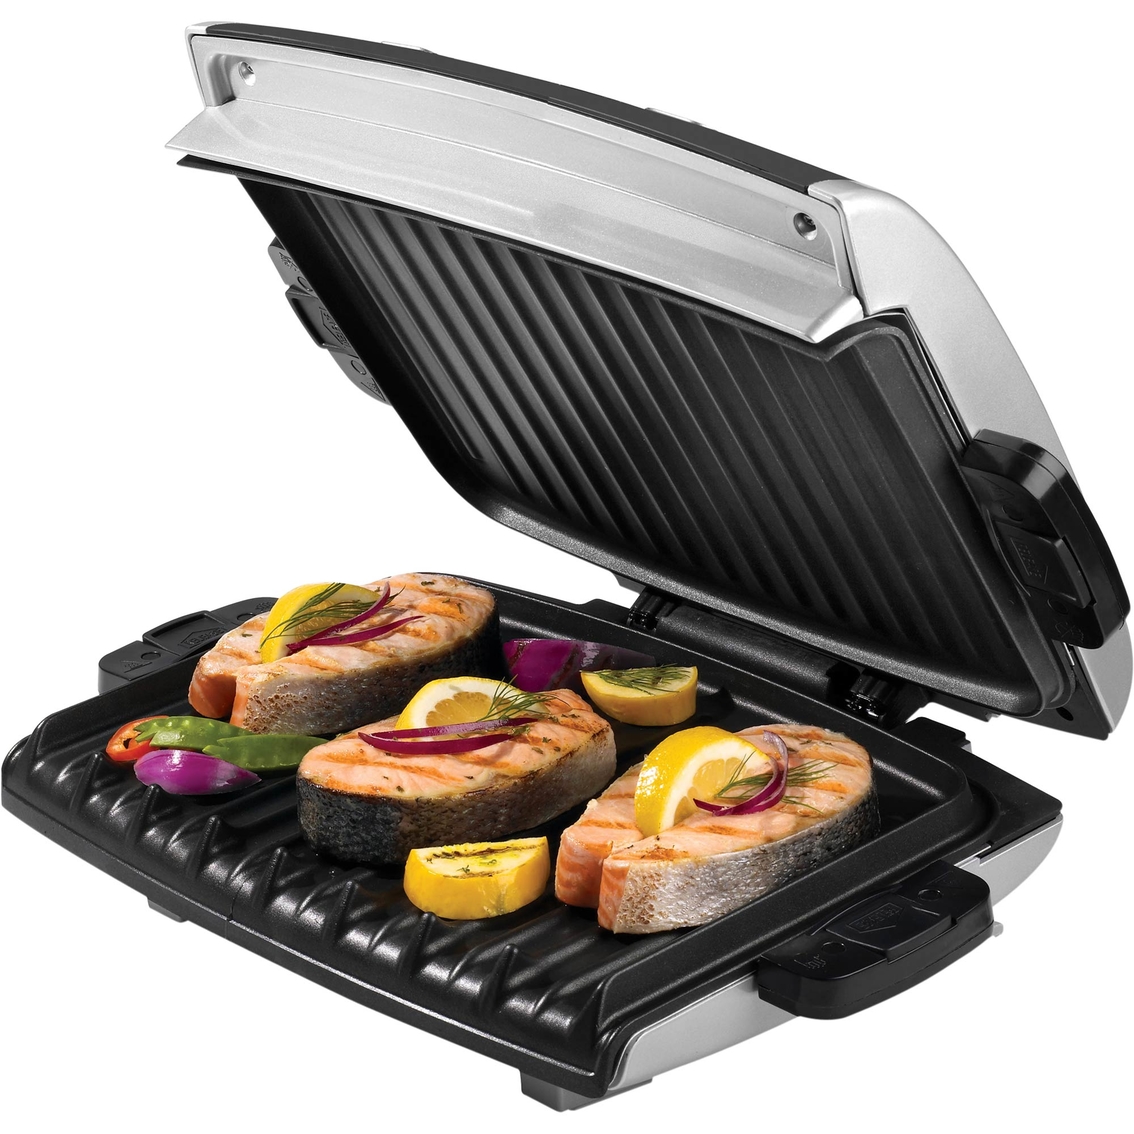 George Foreman Grill with Removable Plates - household items - by